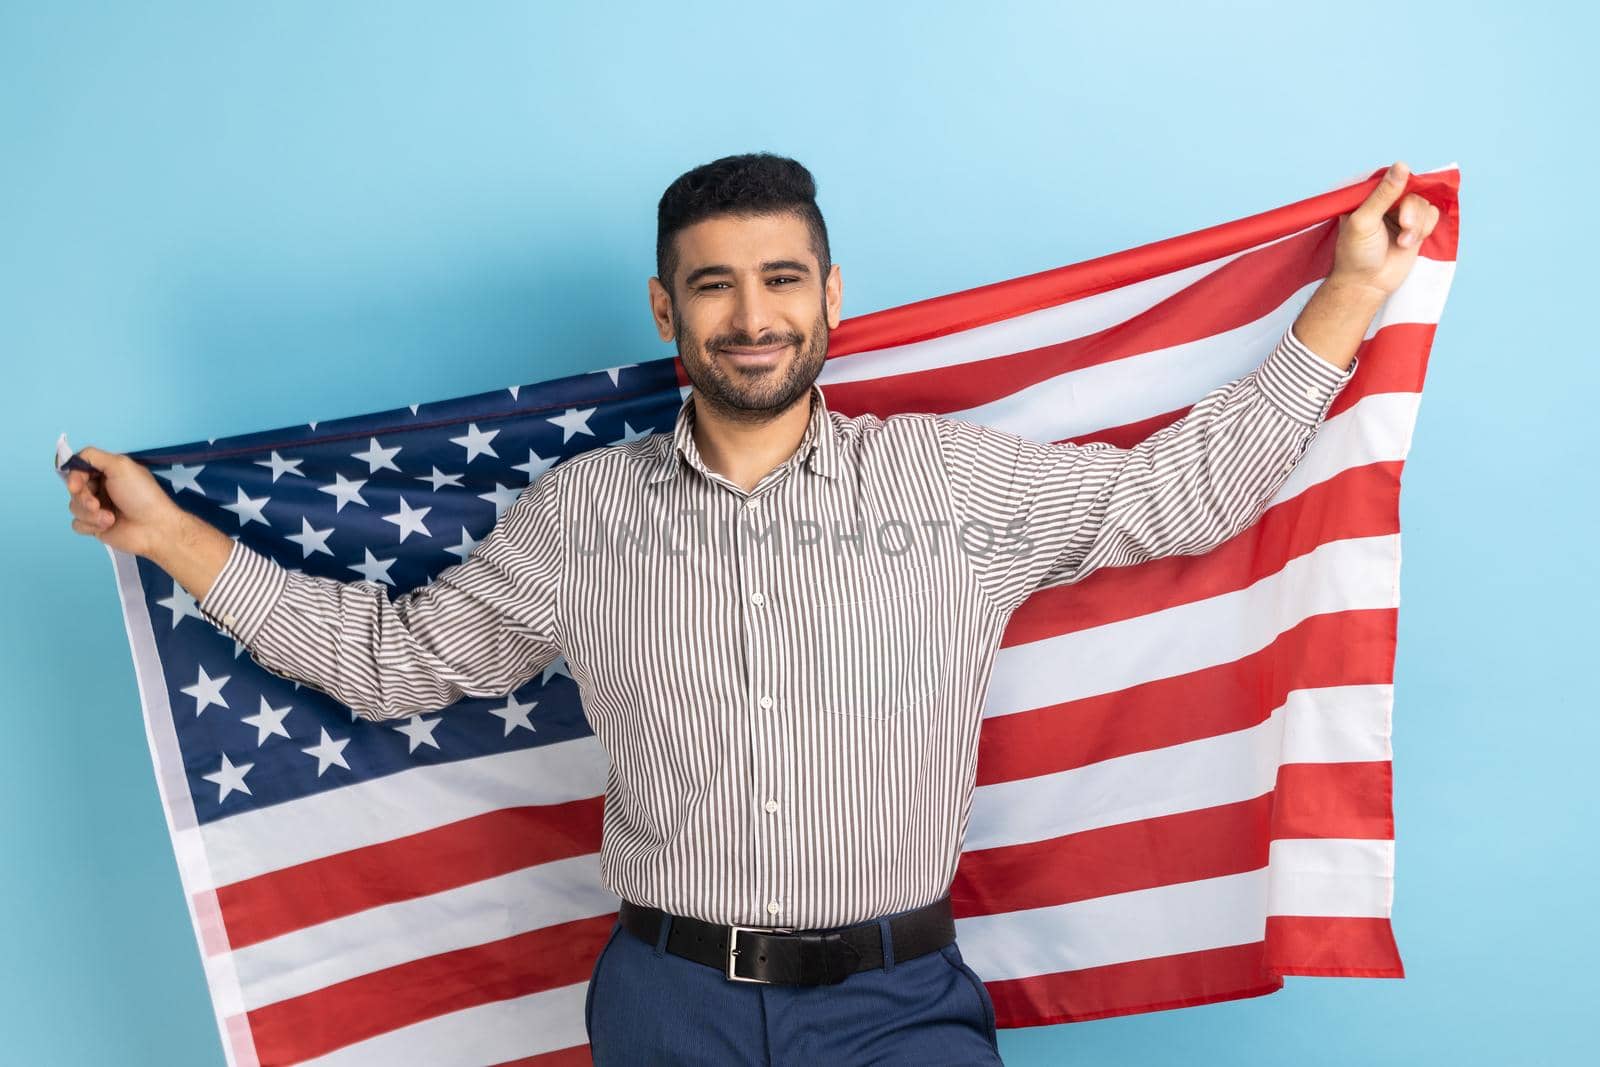 Smiling businessman holding USA flag and looking at camera with smile, celebrating national holiday. by Khosro1